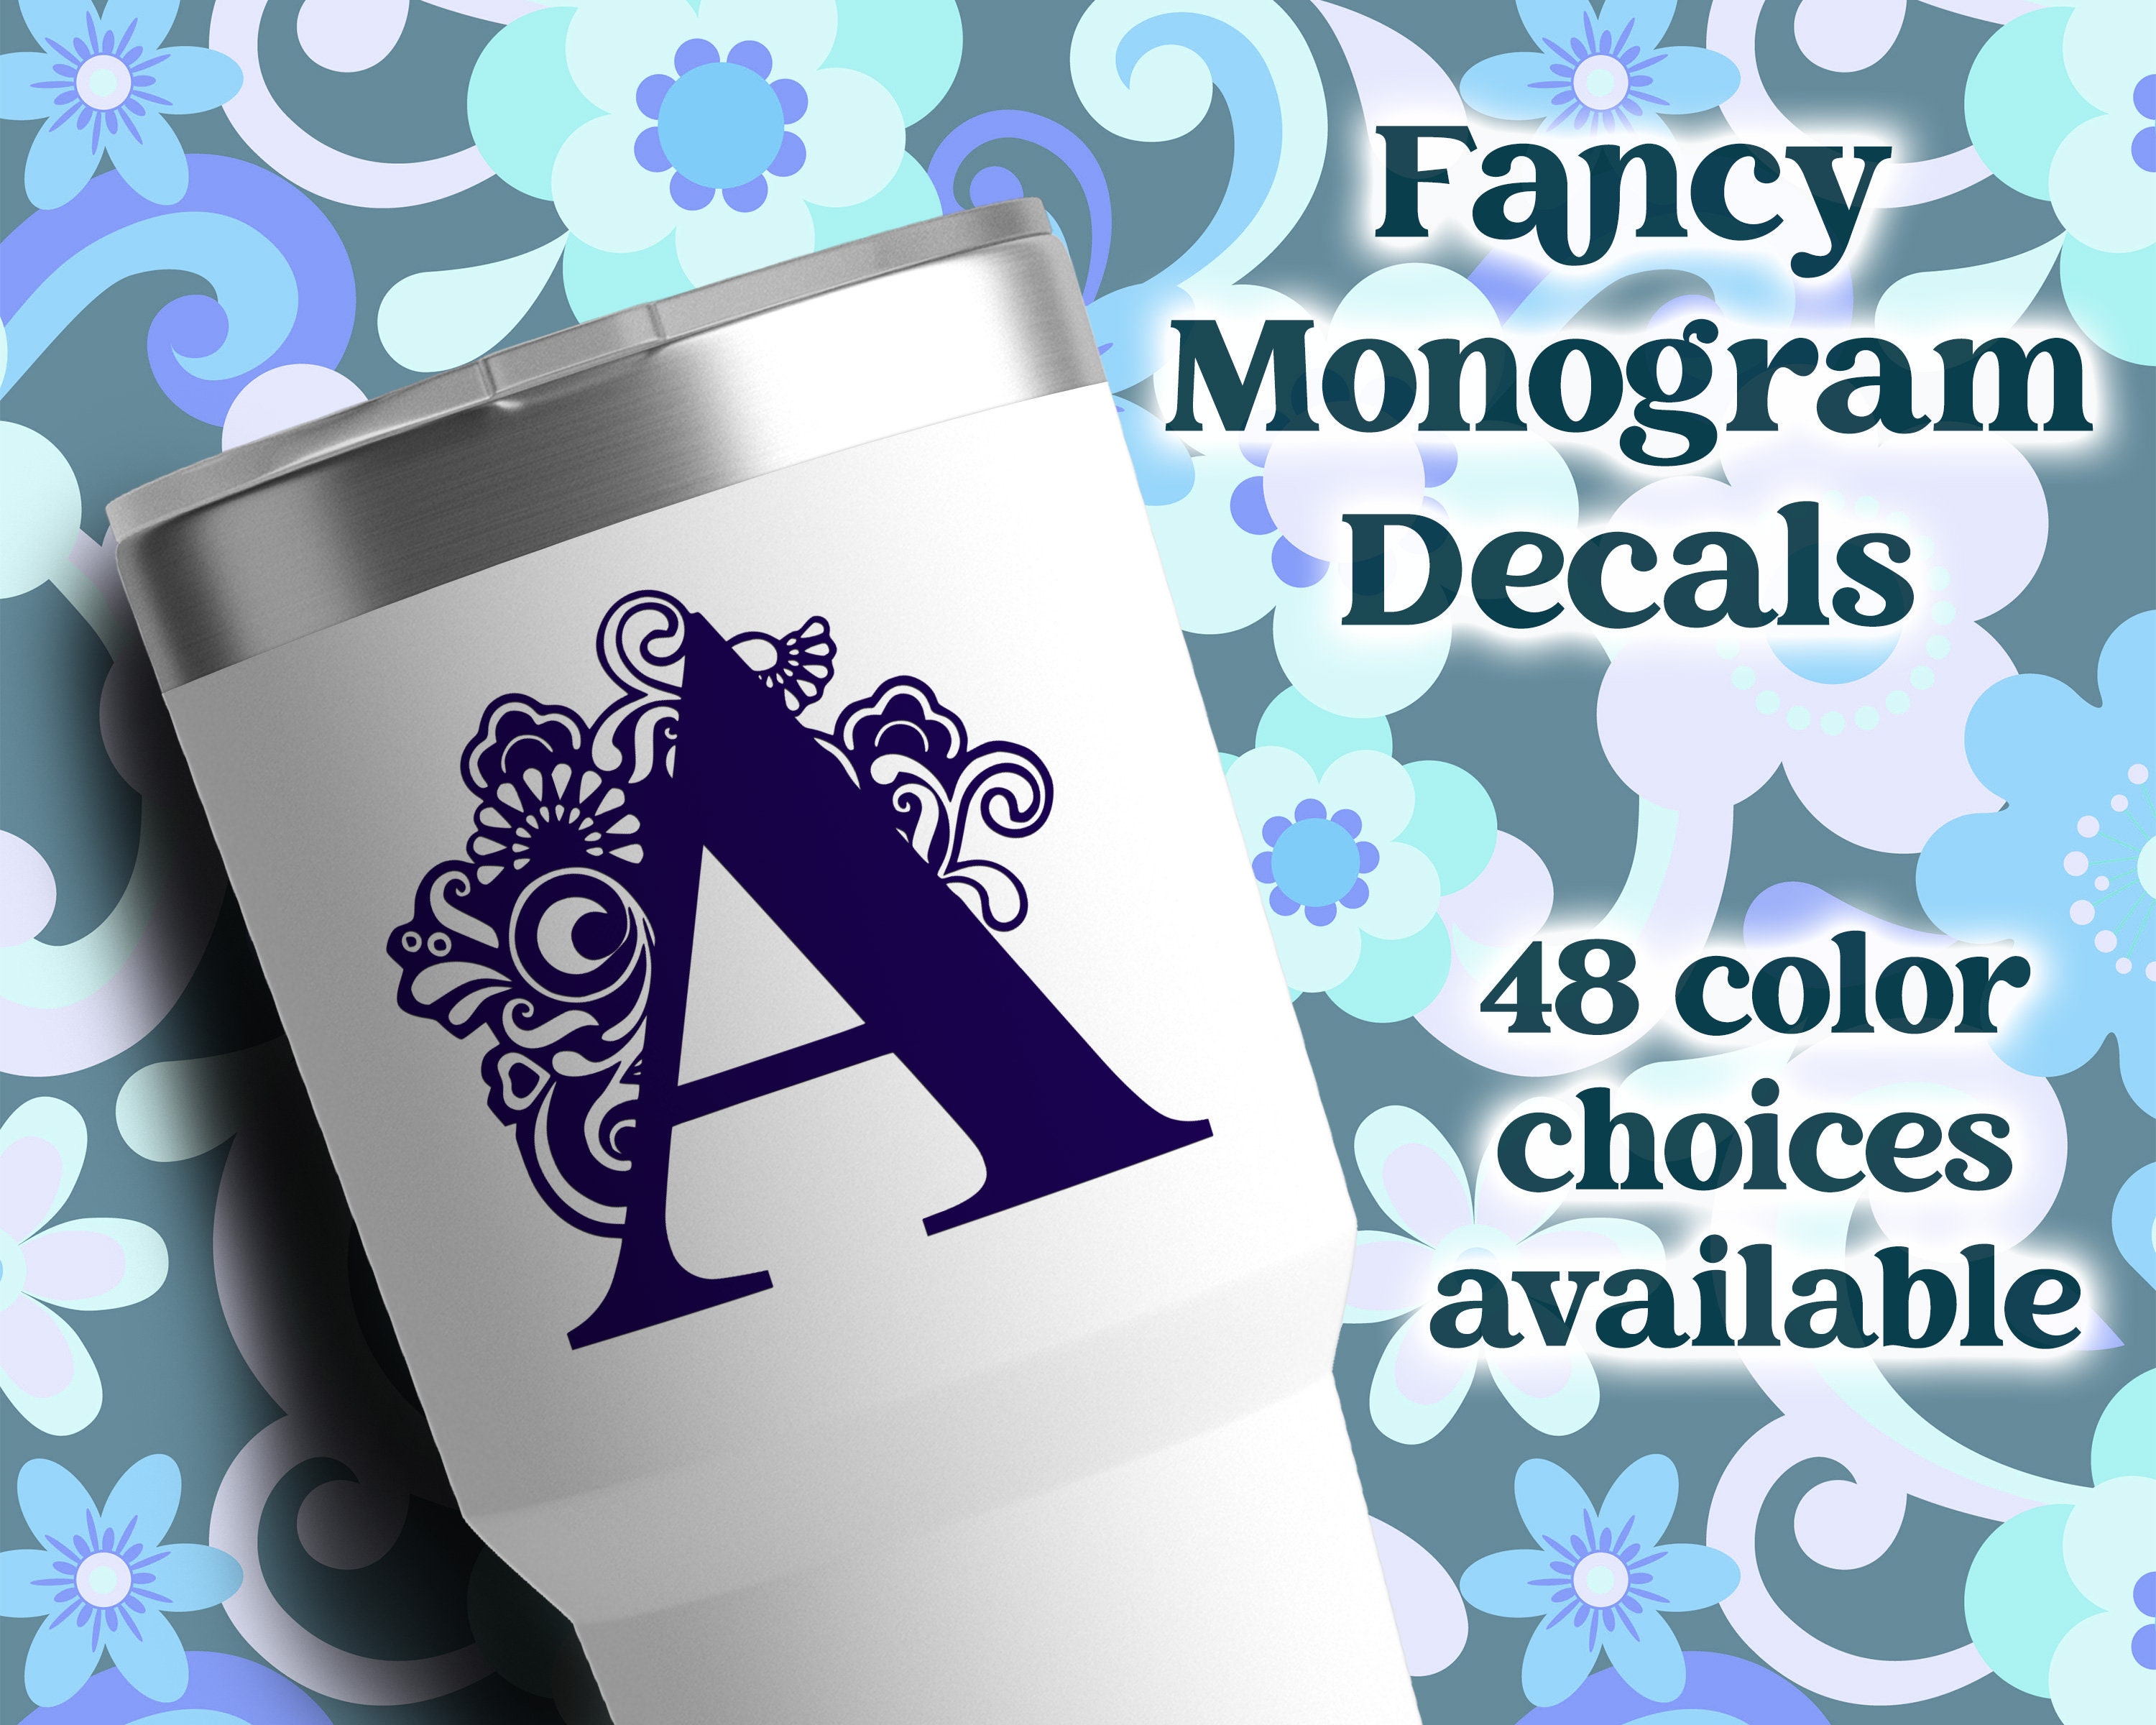 Letter Decals for Tumblers Fancy Letter Decal Fancy Letter Sticker Fancy  Decal Cup Letters Personalized Initial Sticker Yeti 5LN8Y 